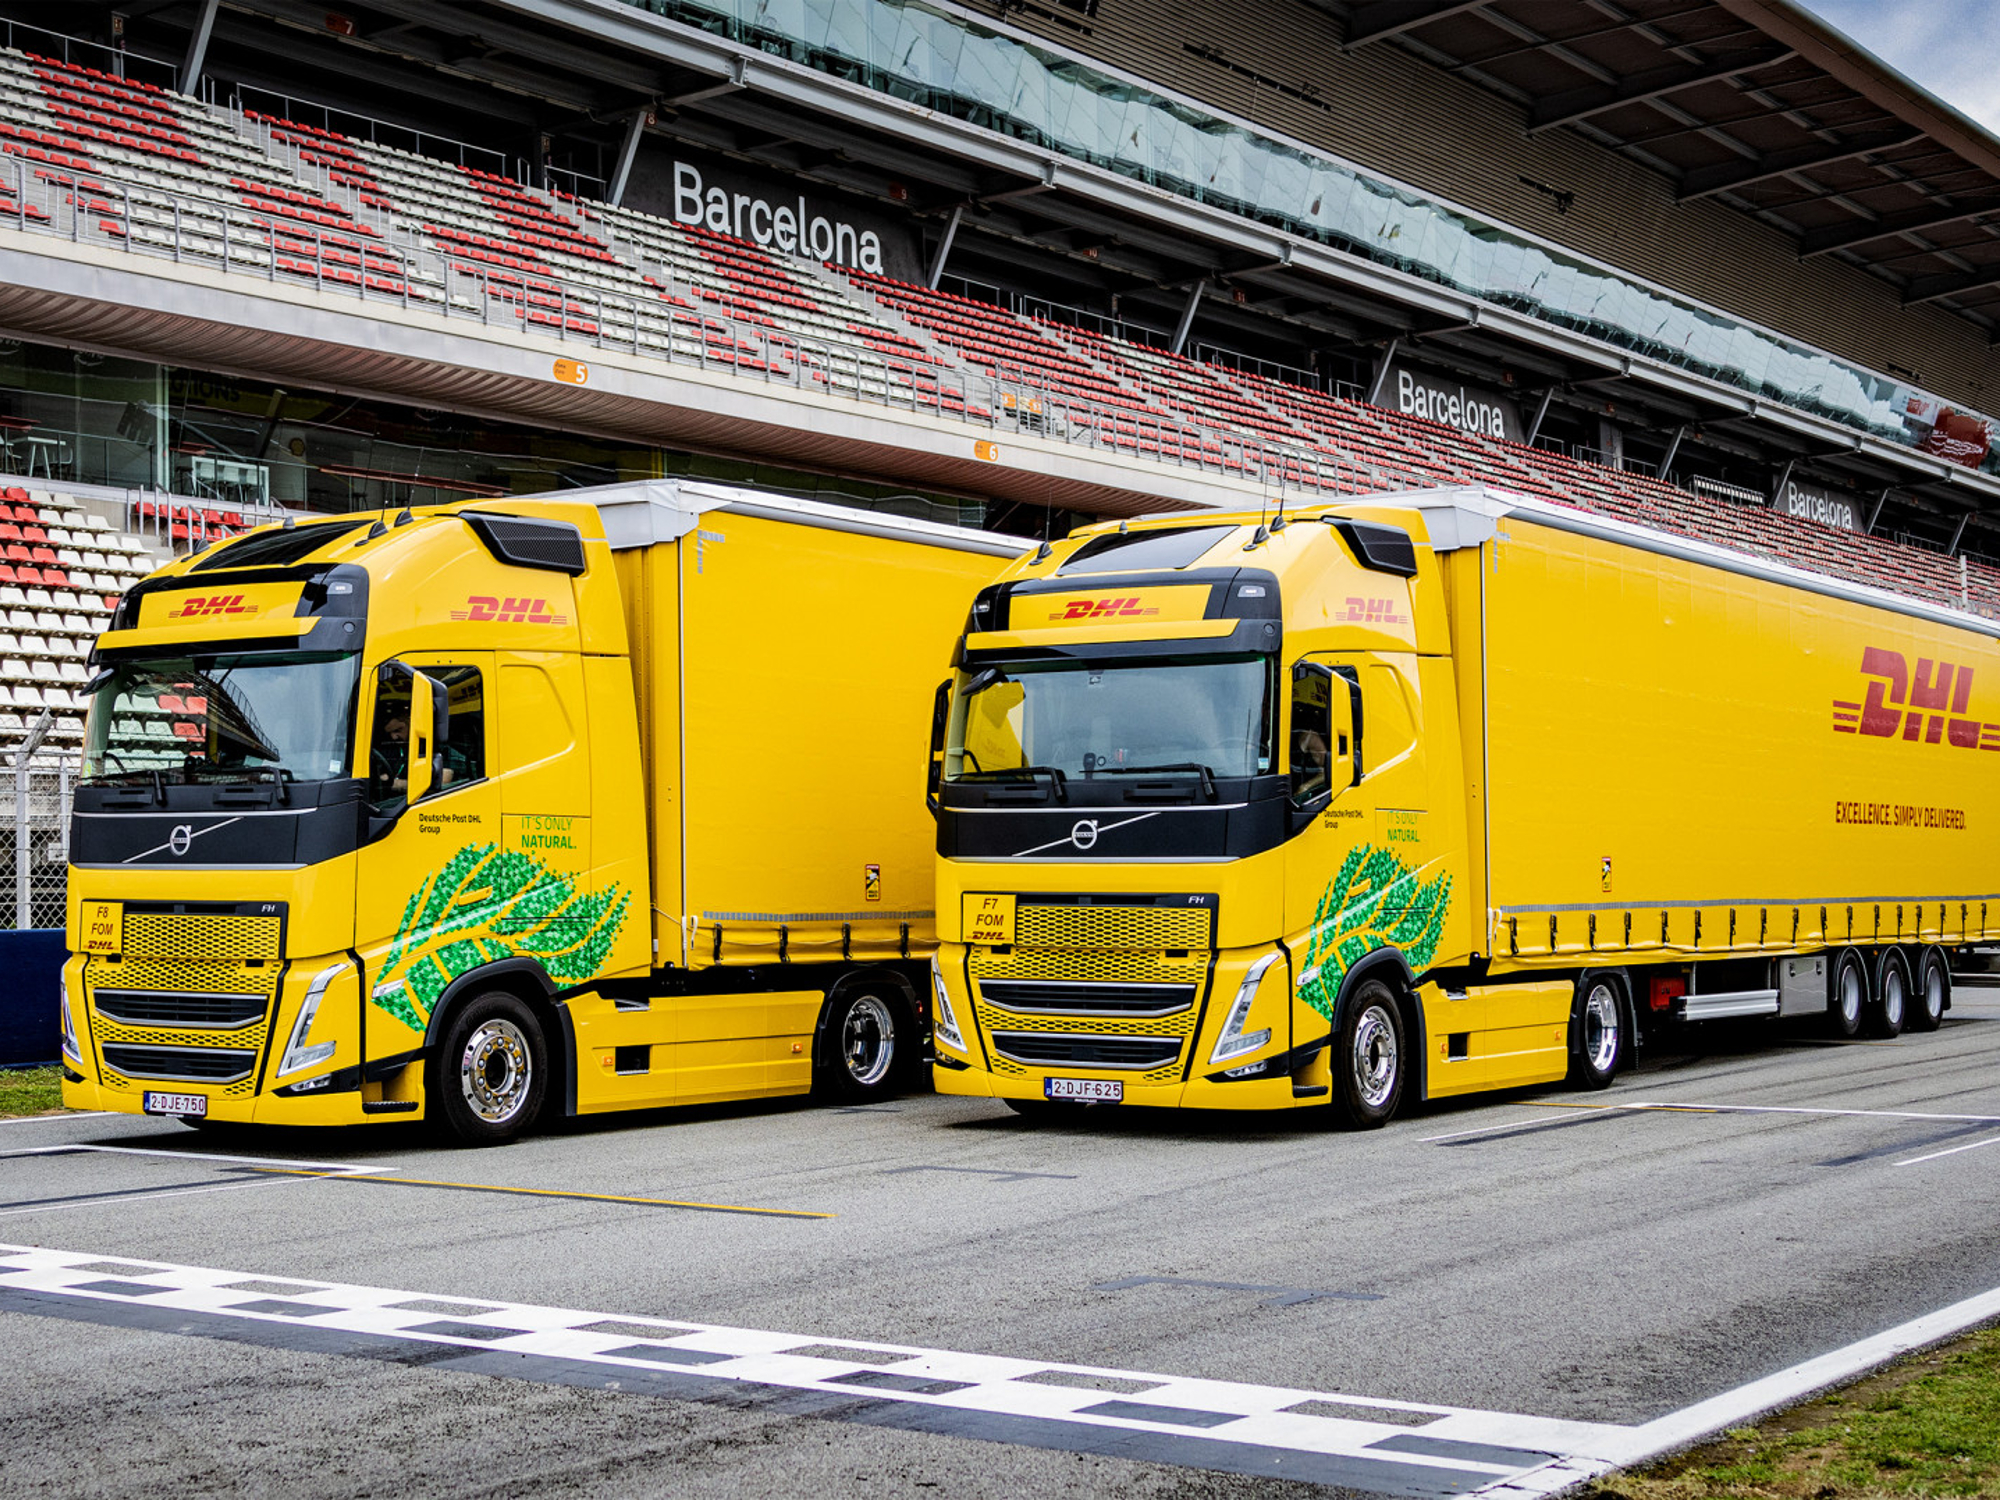 DHL Biofuel trucks deliver team equipment for F1 races in Europe.